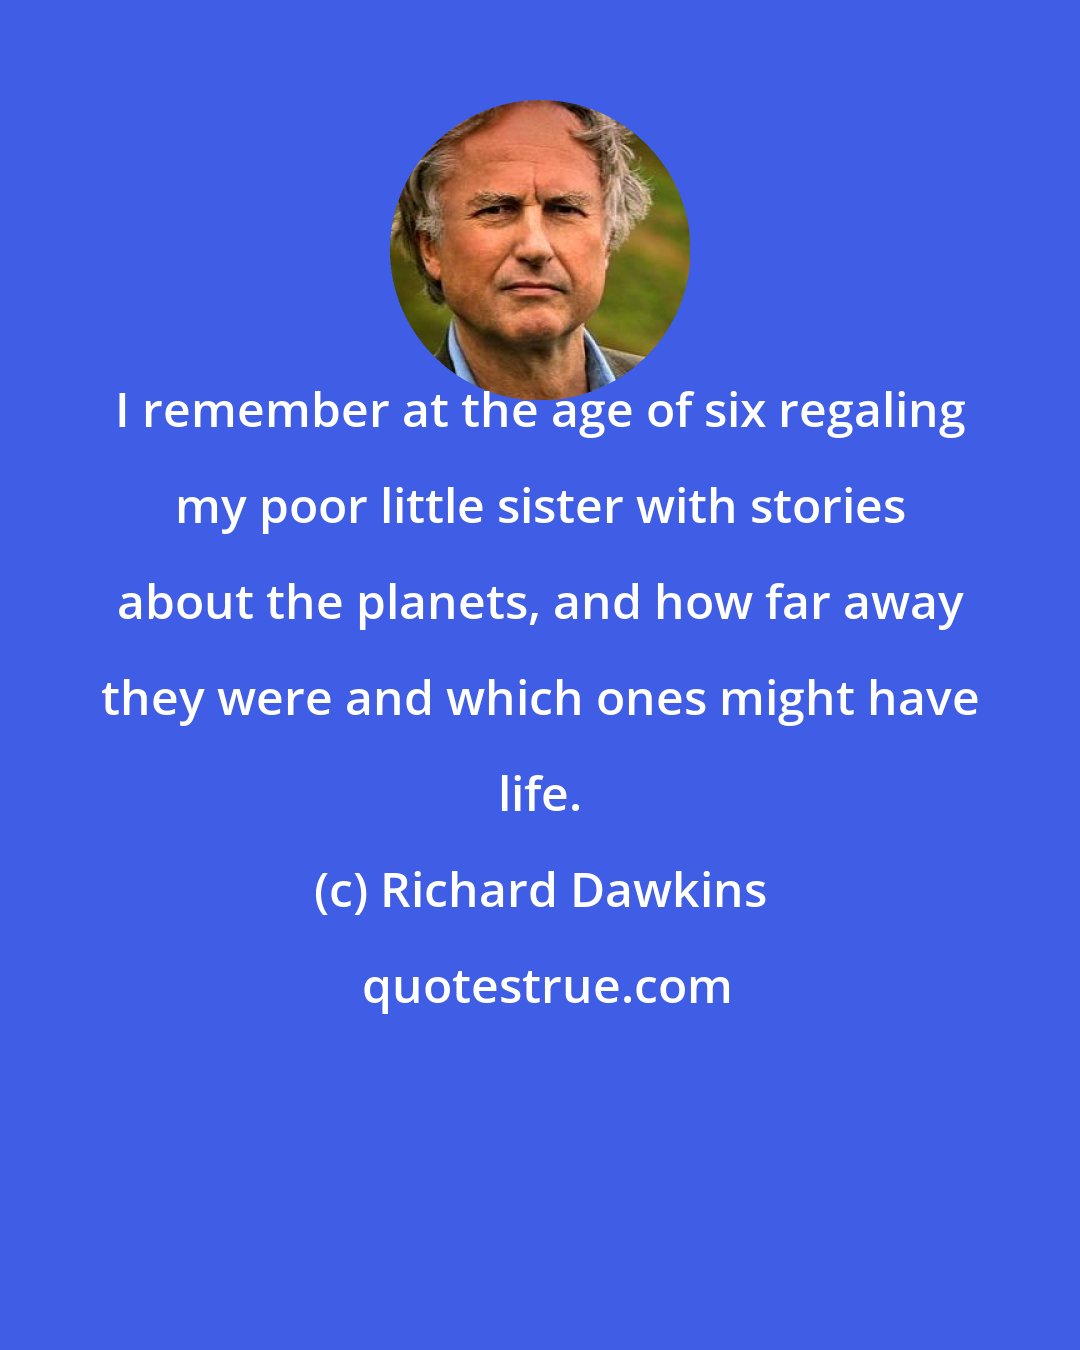 Richard Dawkins: I remember at the age of six regaling my poor little sister with stories about the planets, and how far away they were and which ones might have life.